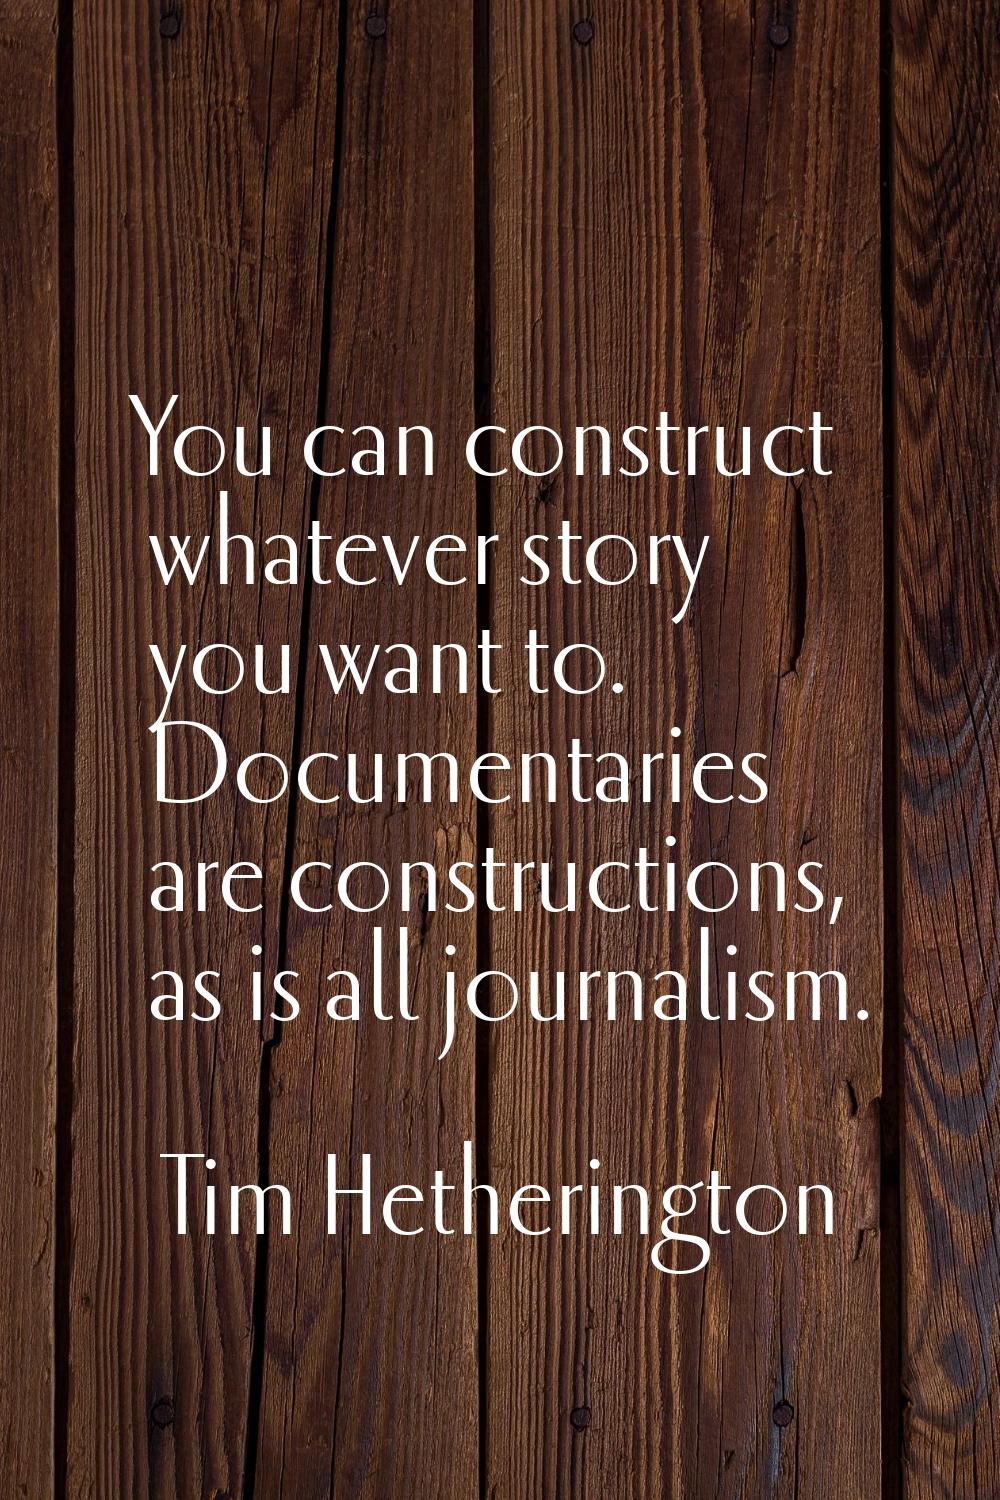 You can construct whatever story you want to. Documentaries are constructions, as is all journalism